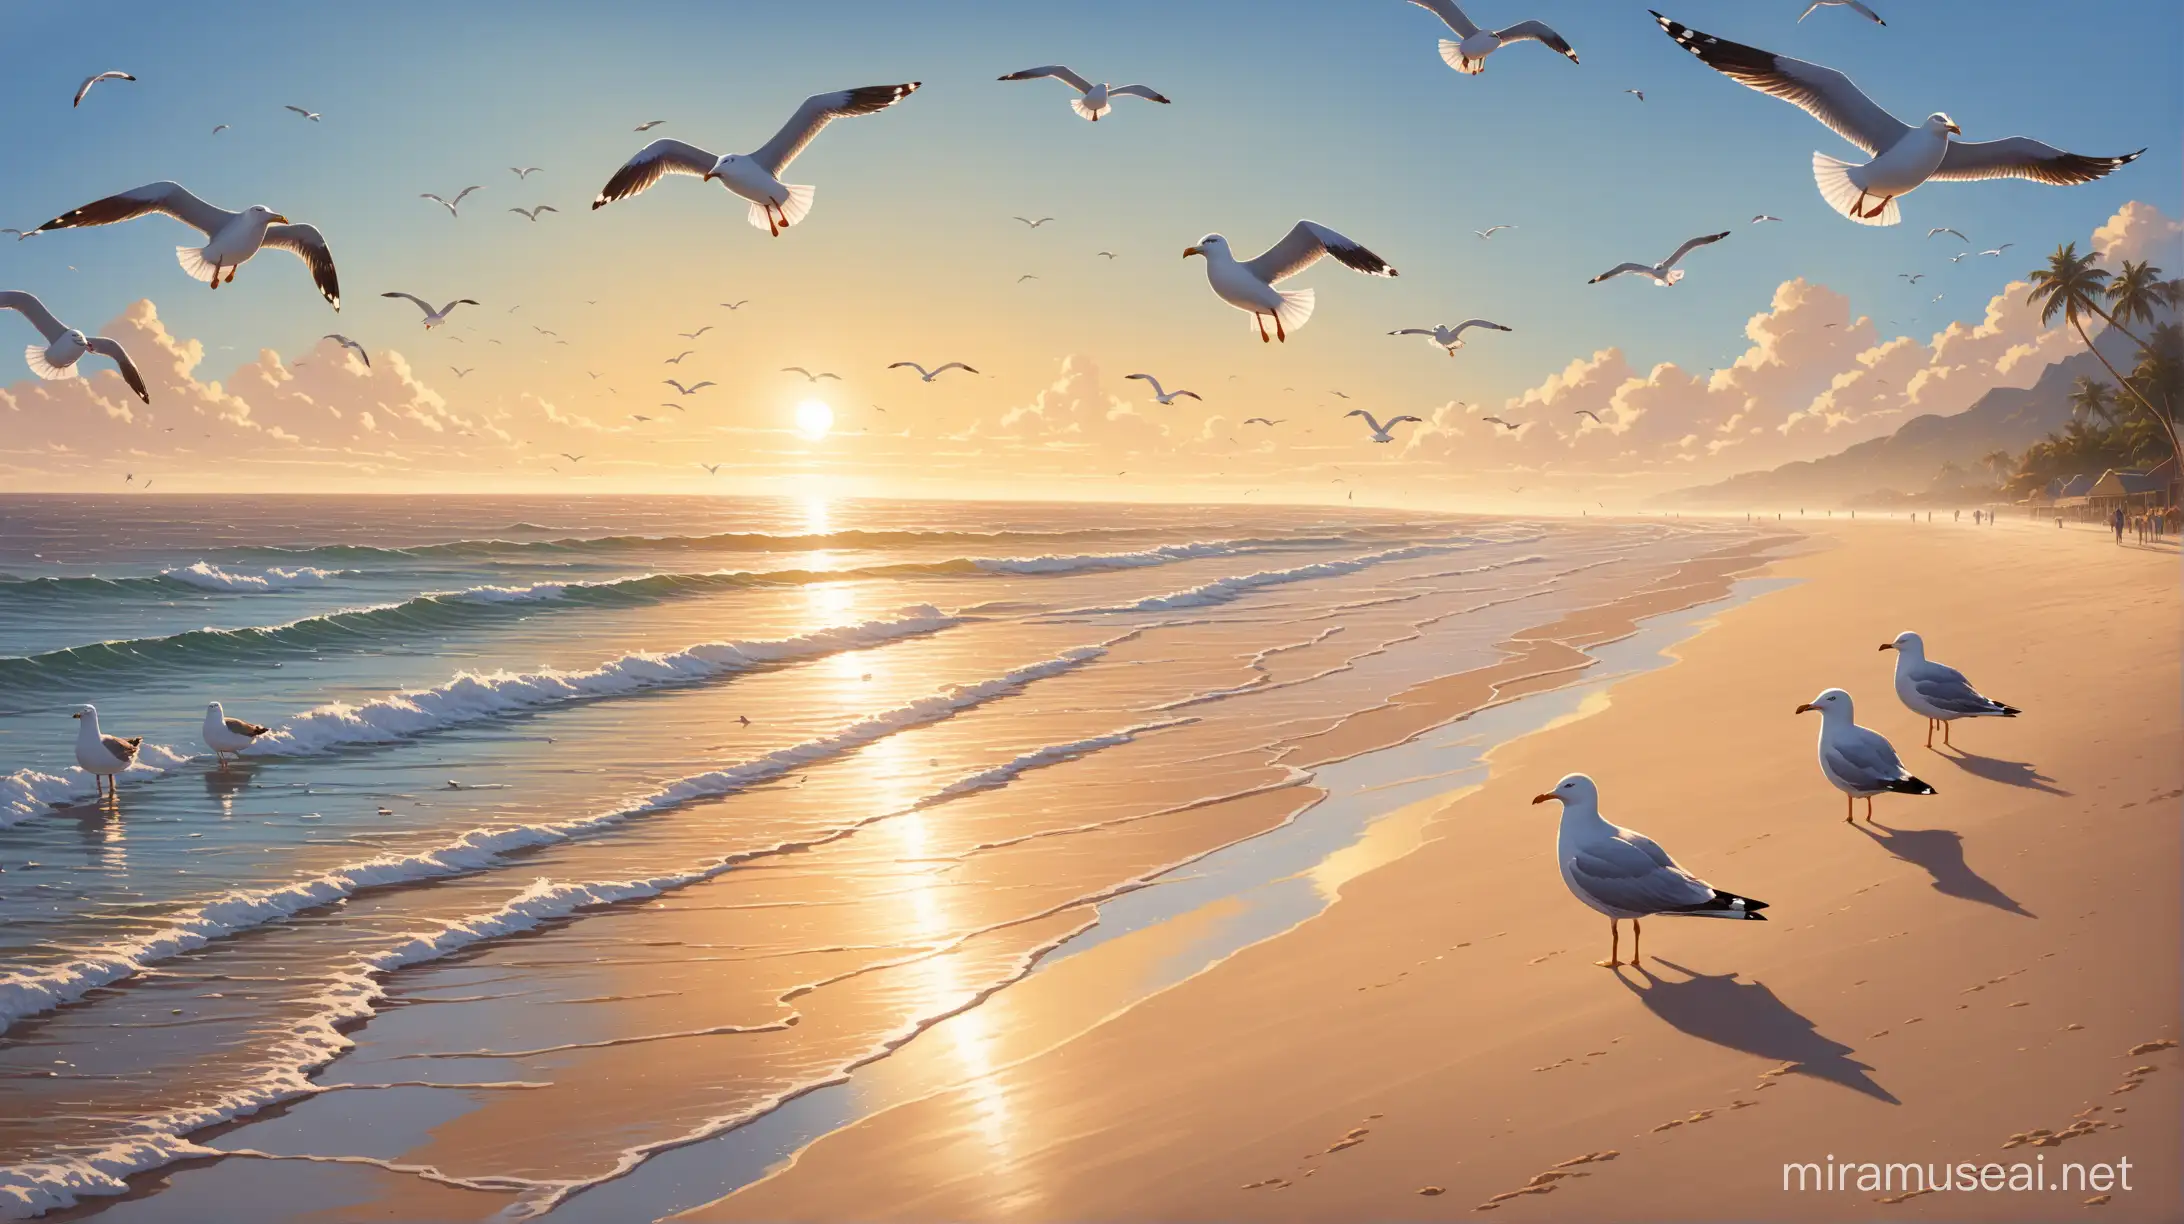 Detailed Morning Scene at the Beach with Seagulls and Birds